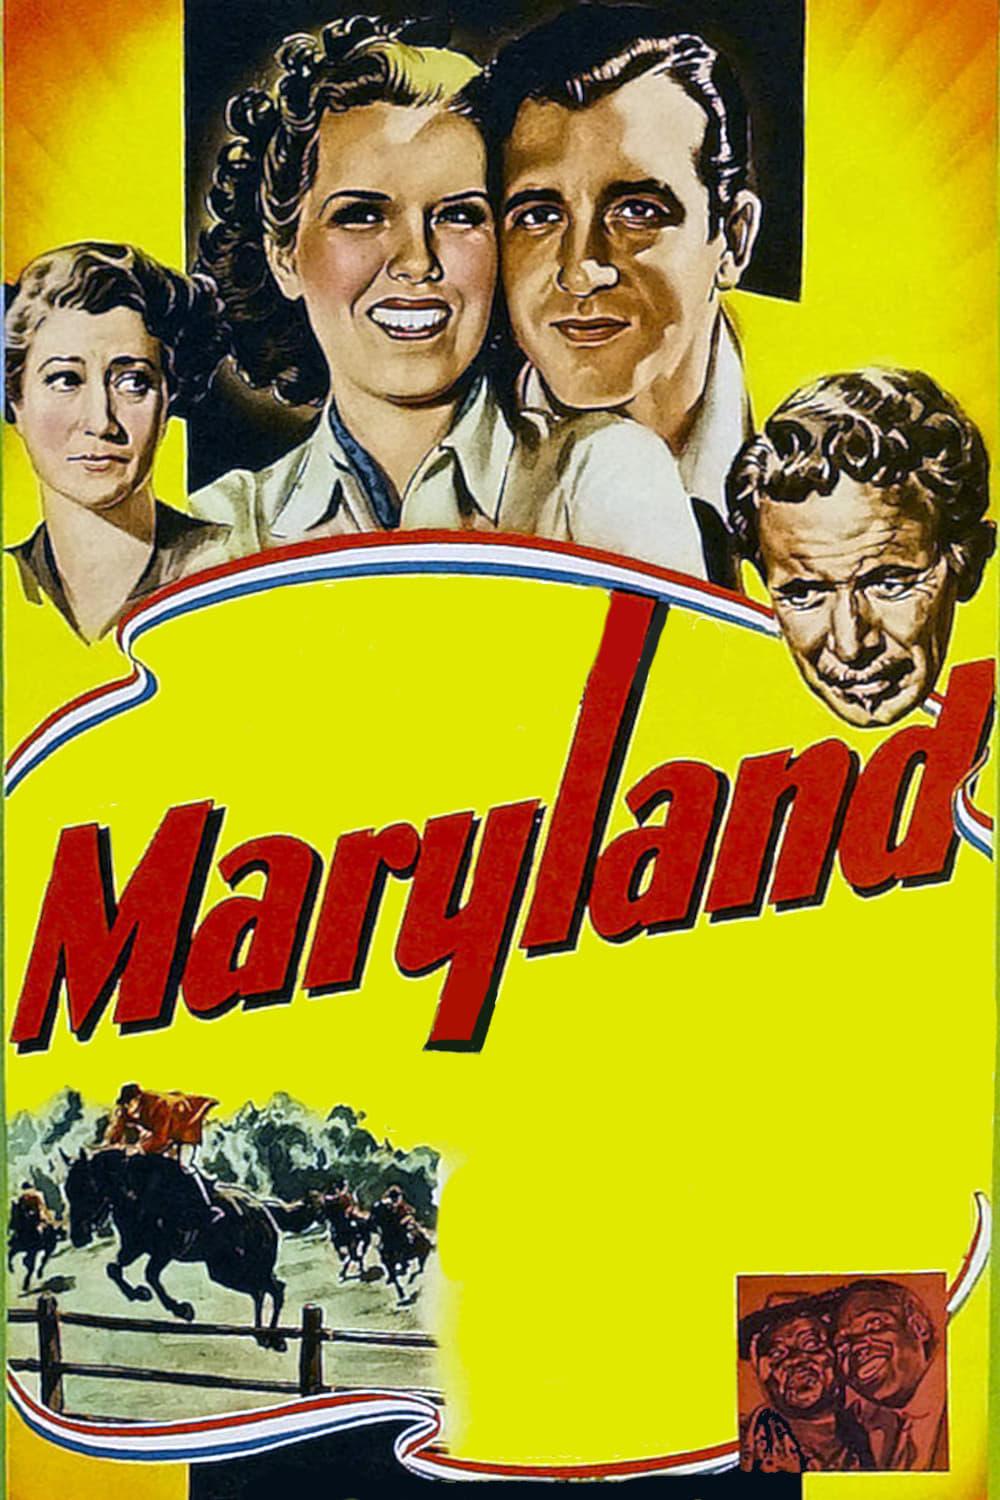 Maryland poster